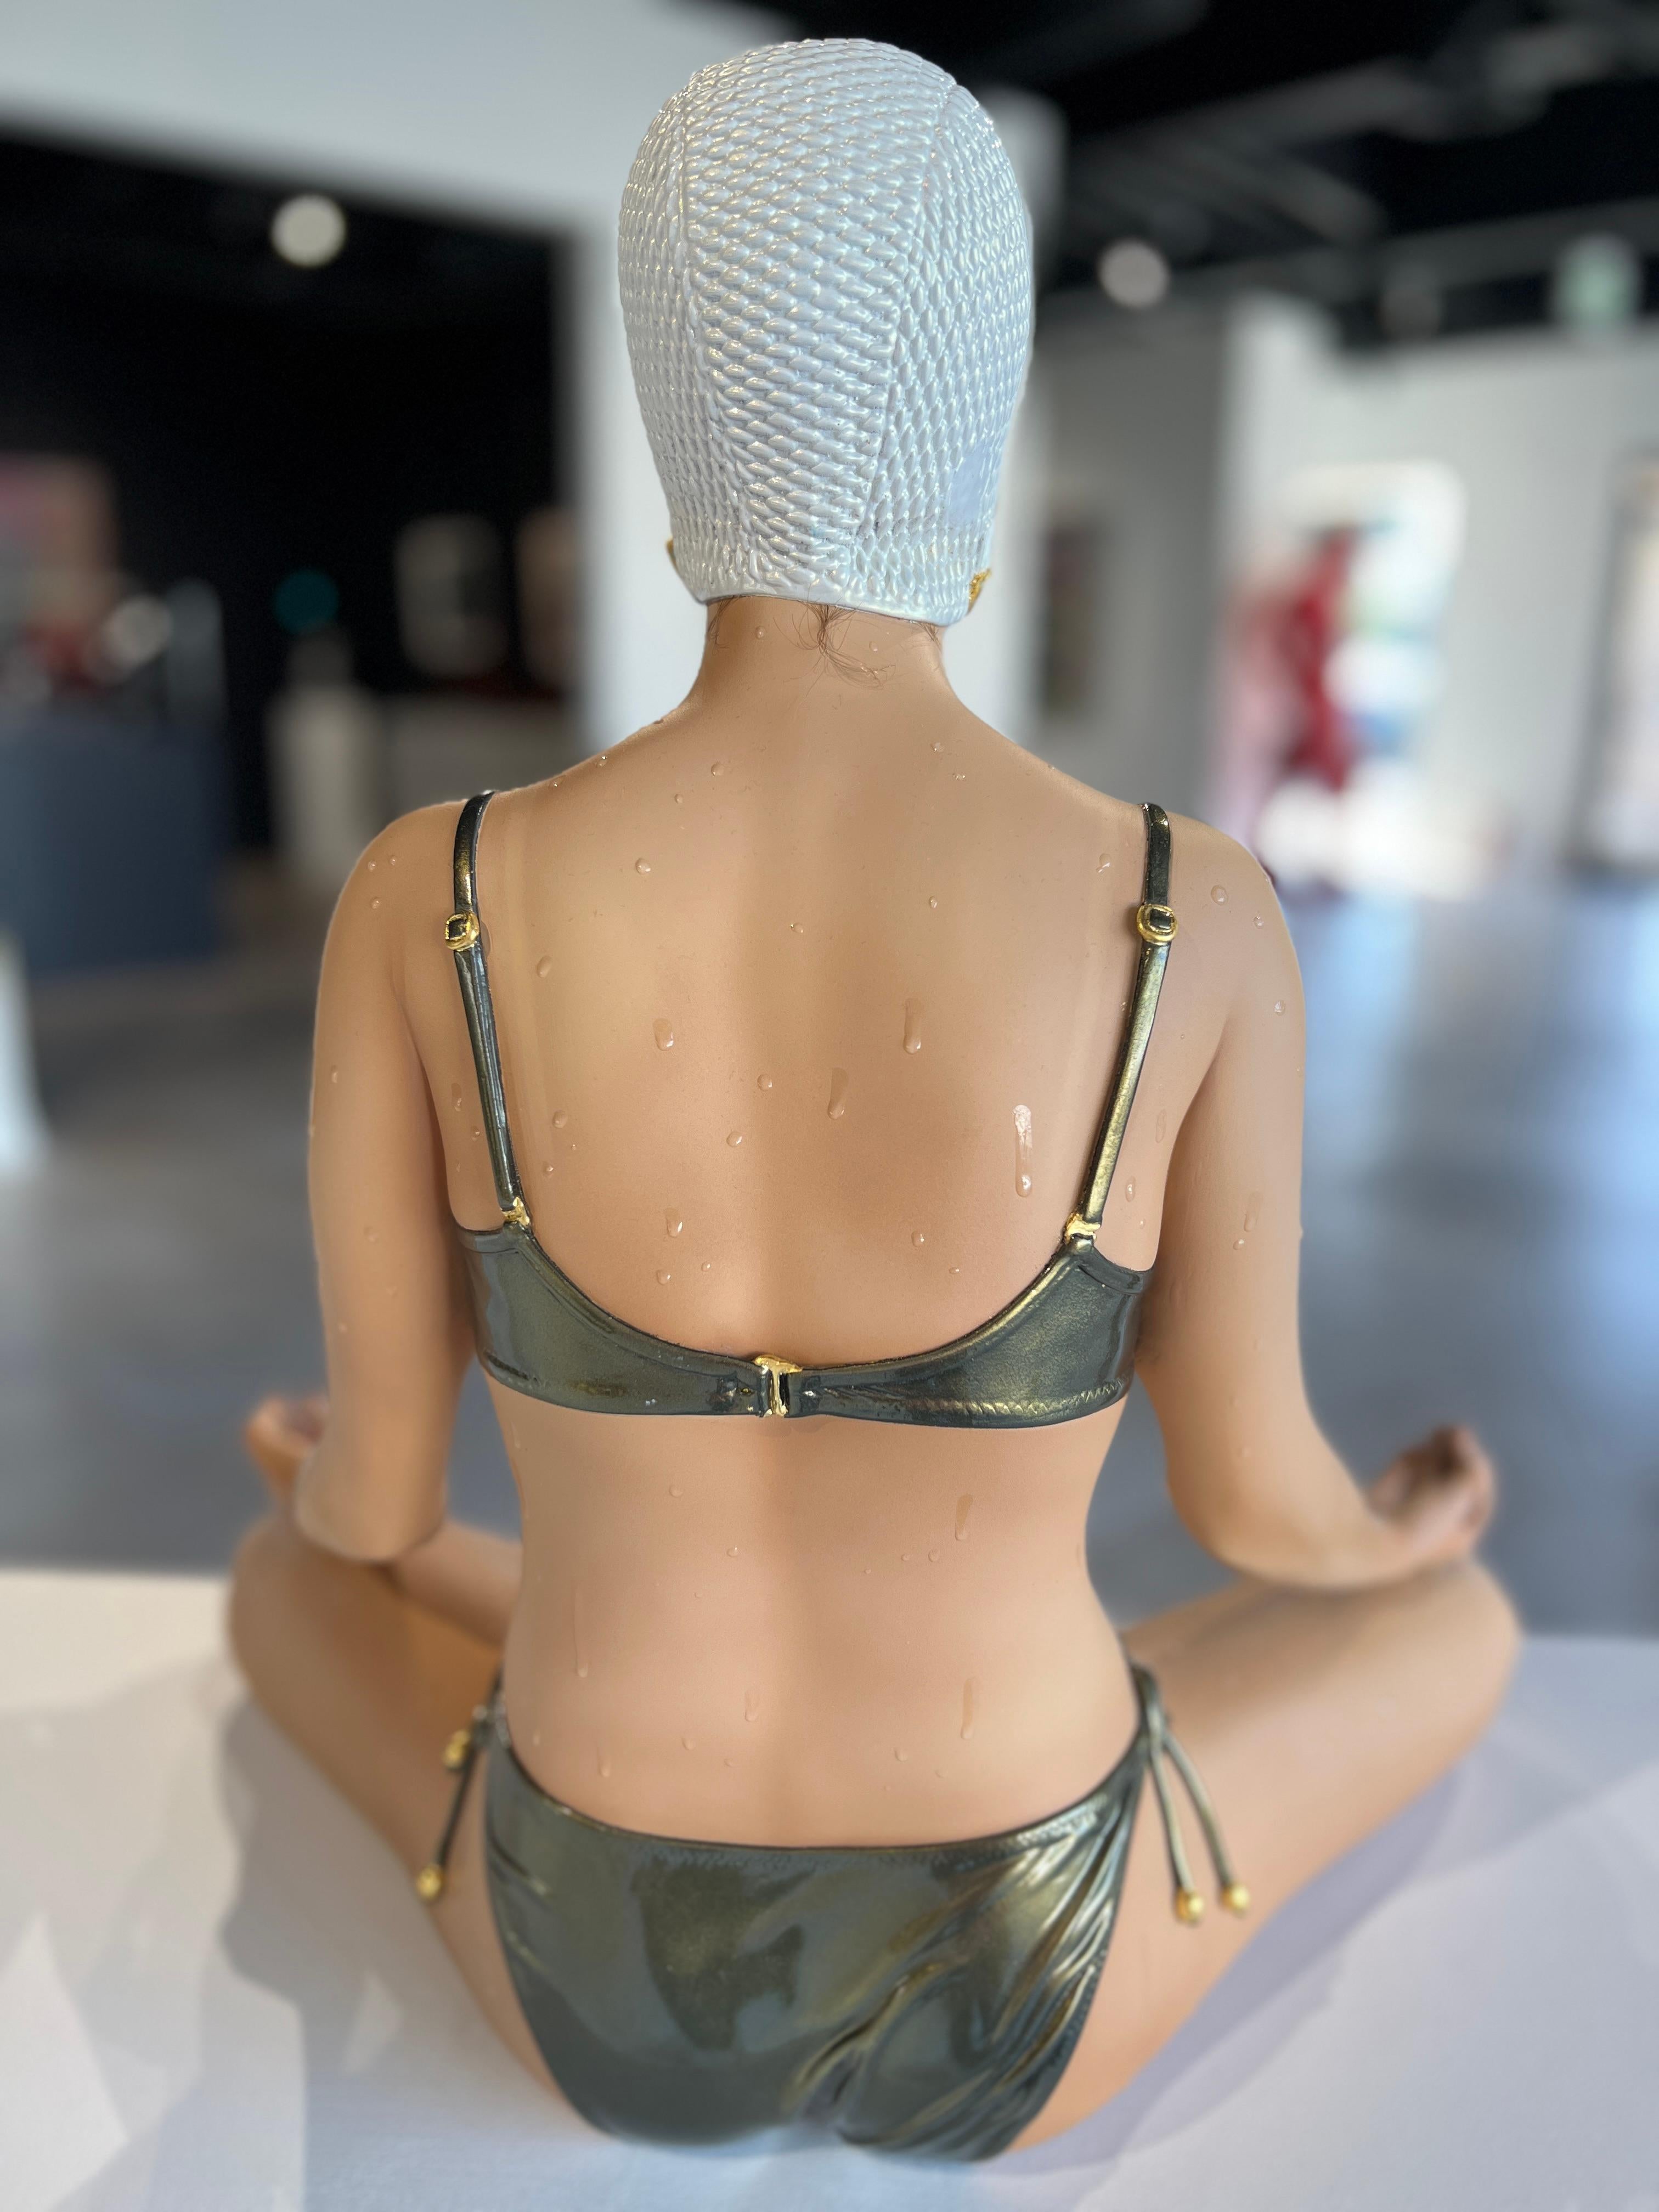 Miniature Balance with Painted Pearl White Cap and Green Suit - Contemporary Sculpture by Carole A. Feuerman